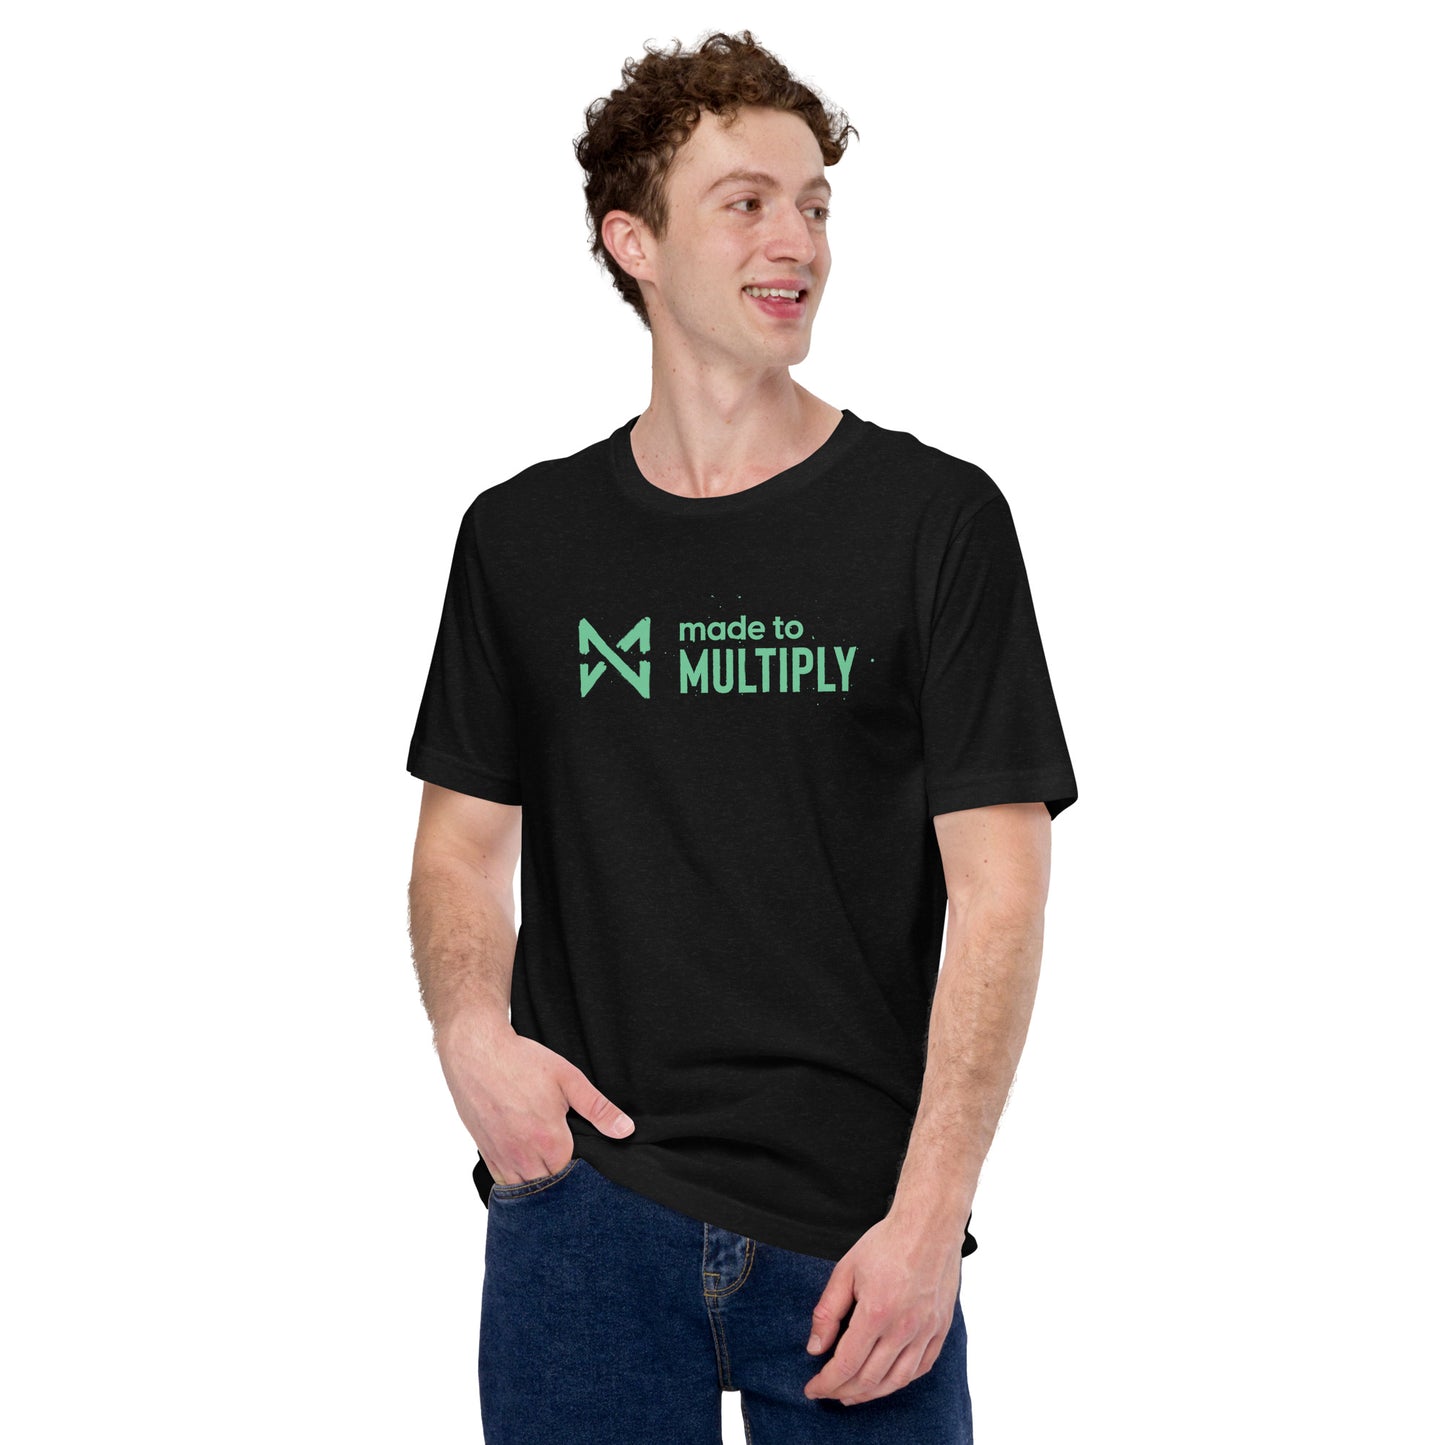 Made to Multiply - Unisex T-shirt